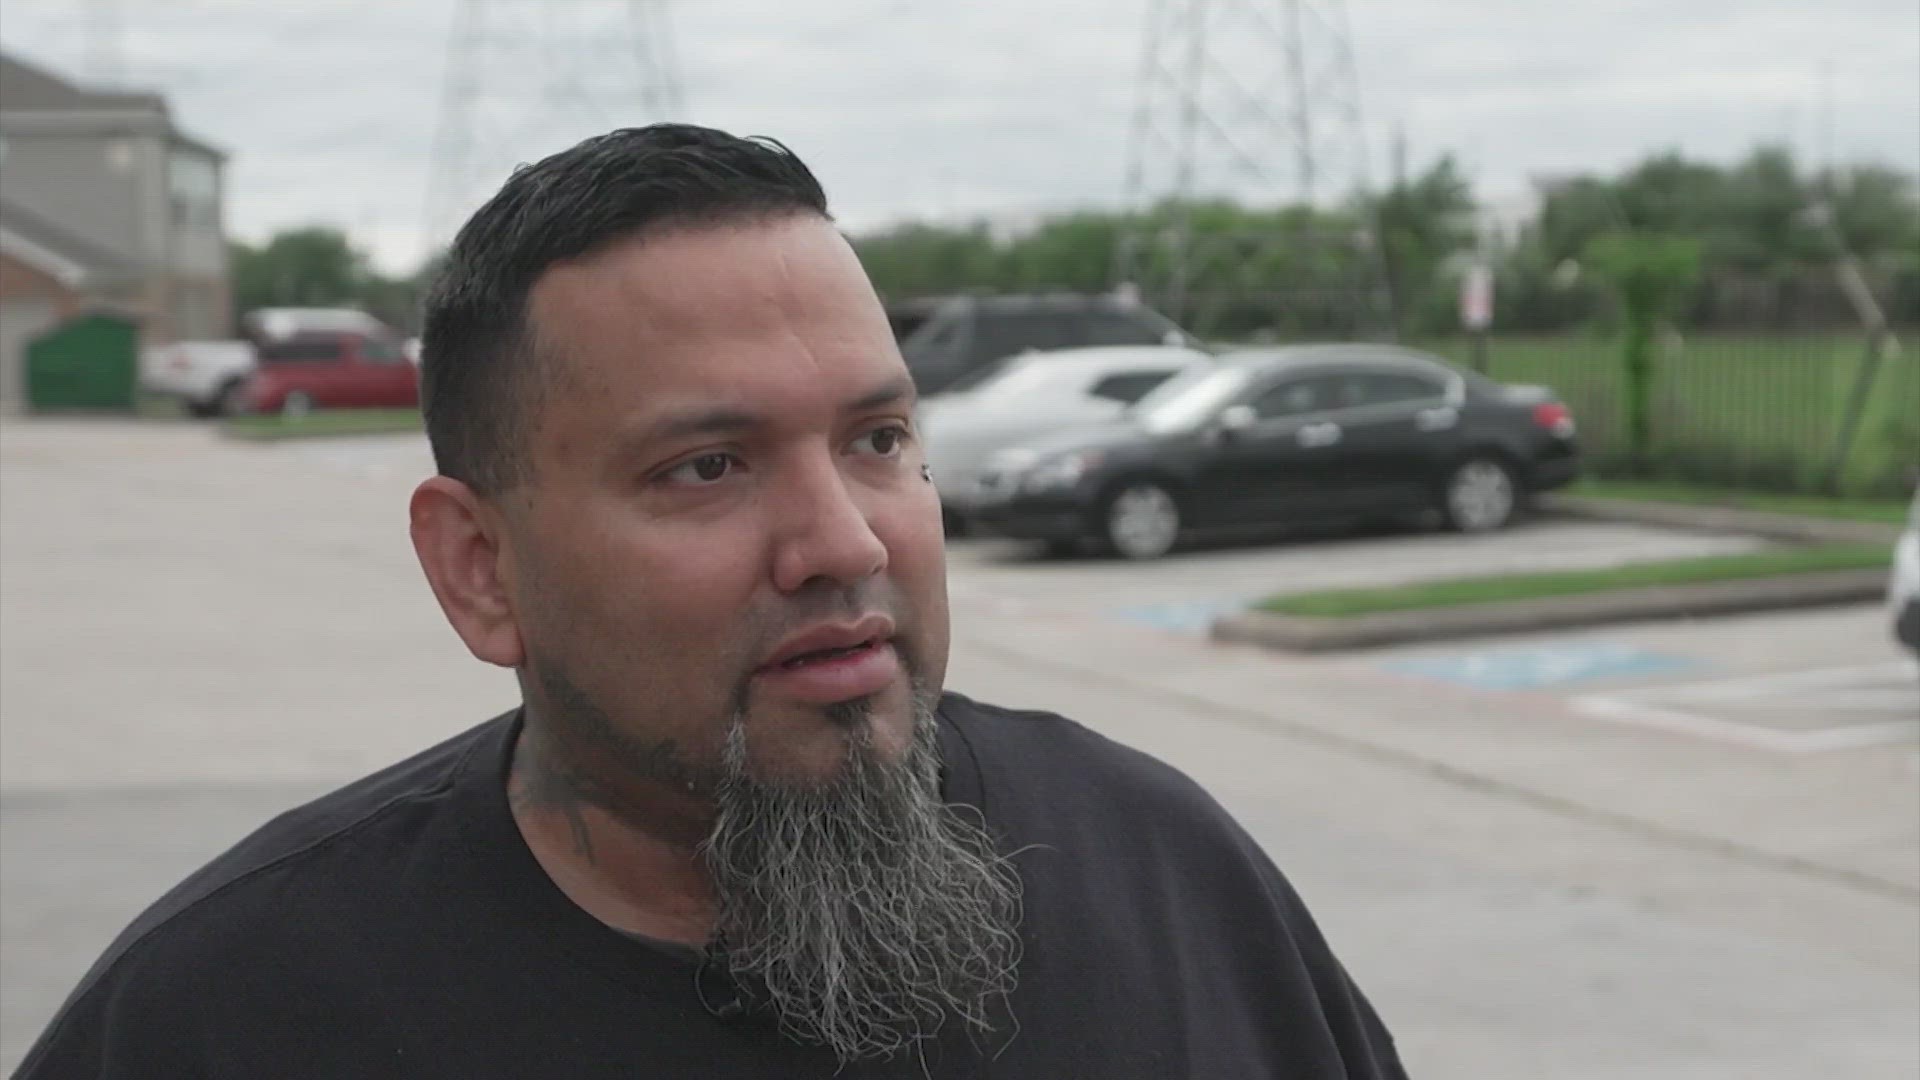 The brother of a man who was shot and killed in Houston last month said it could have been prevented.